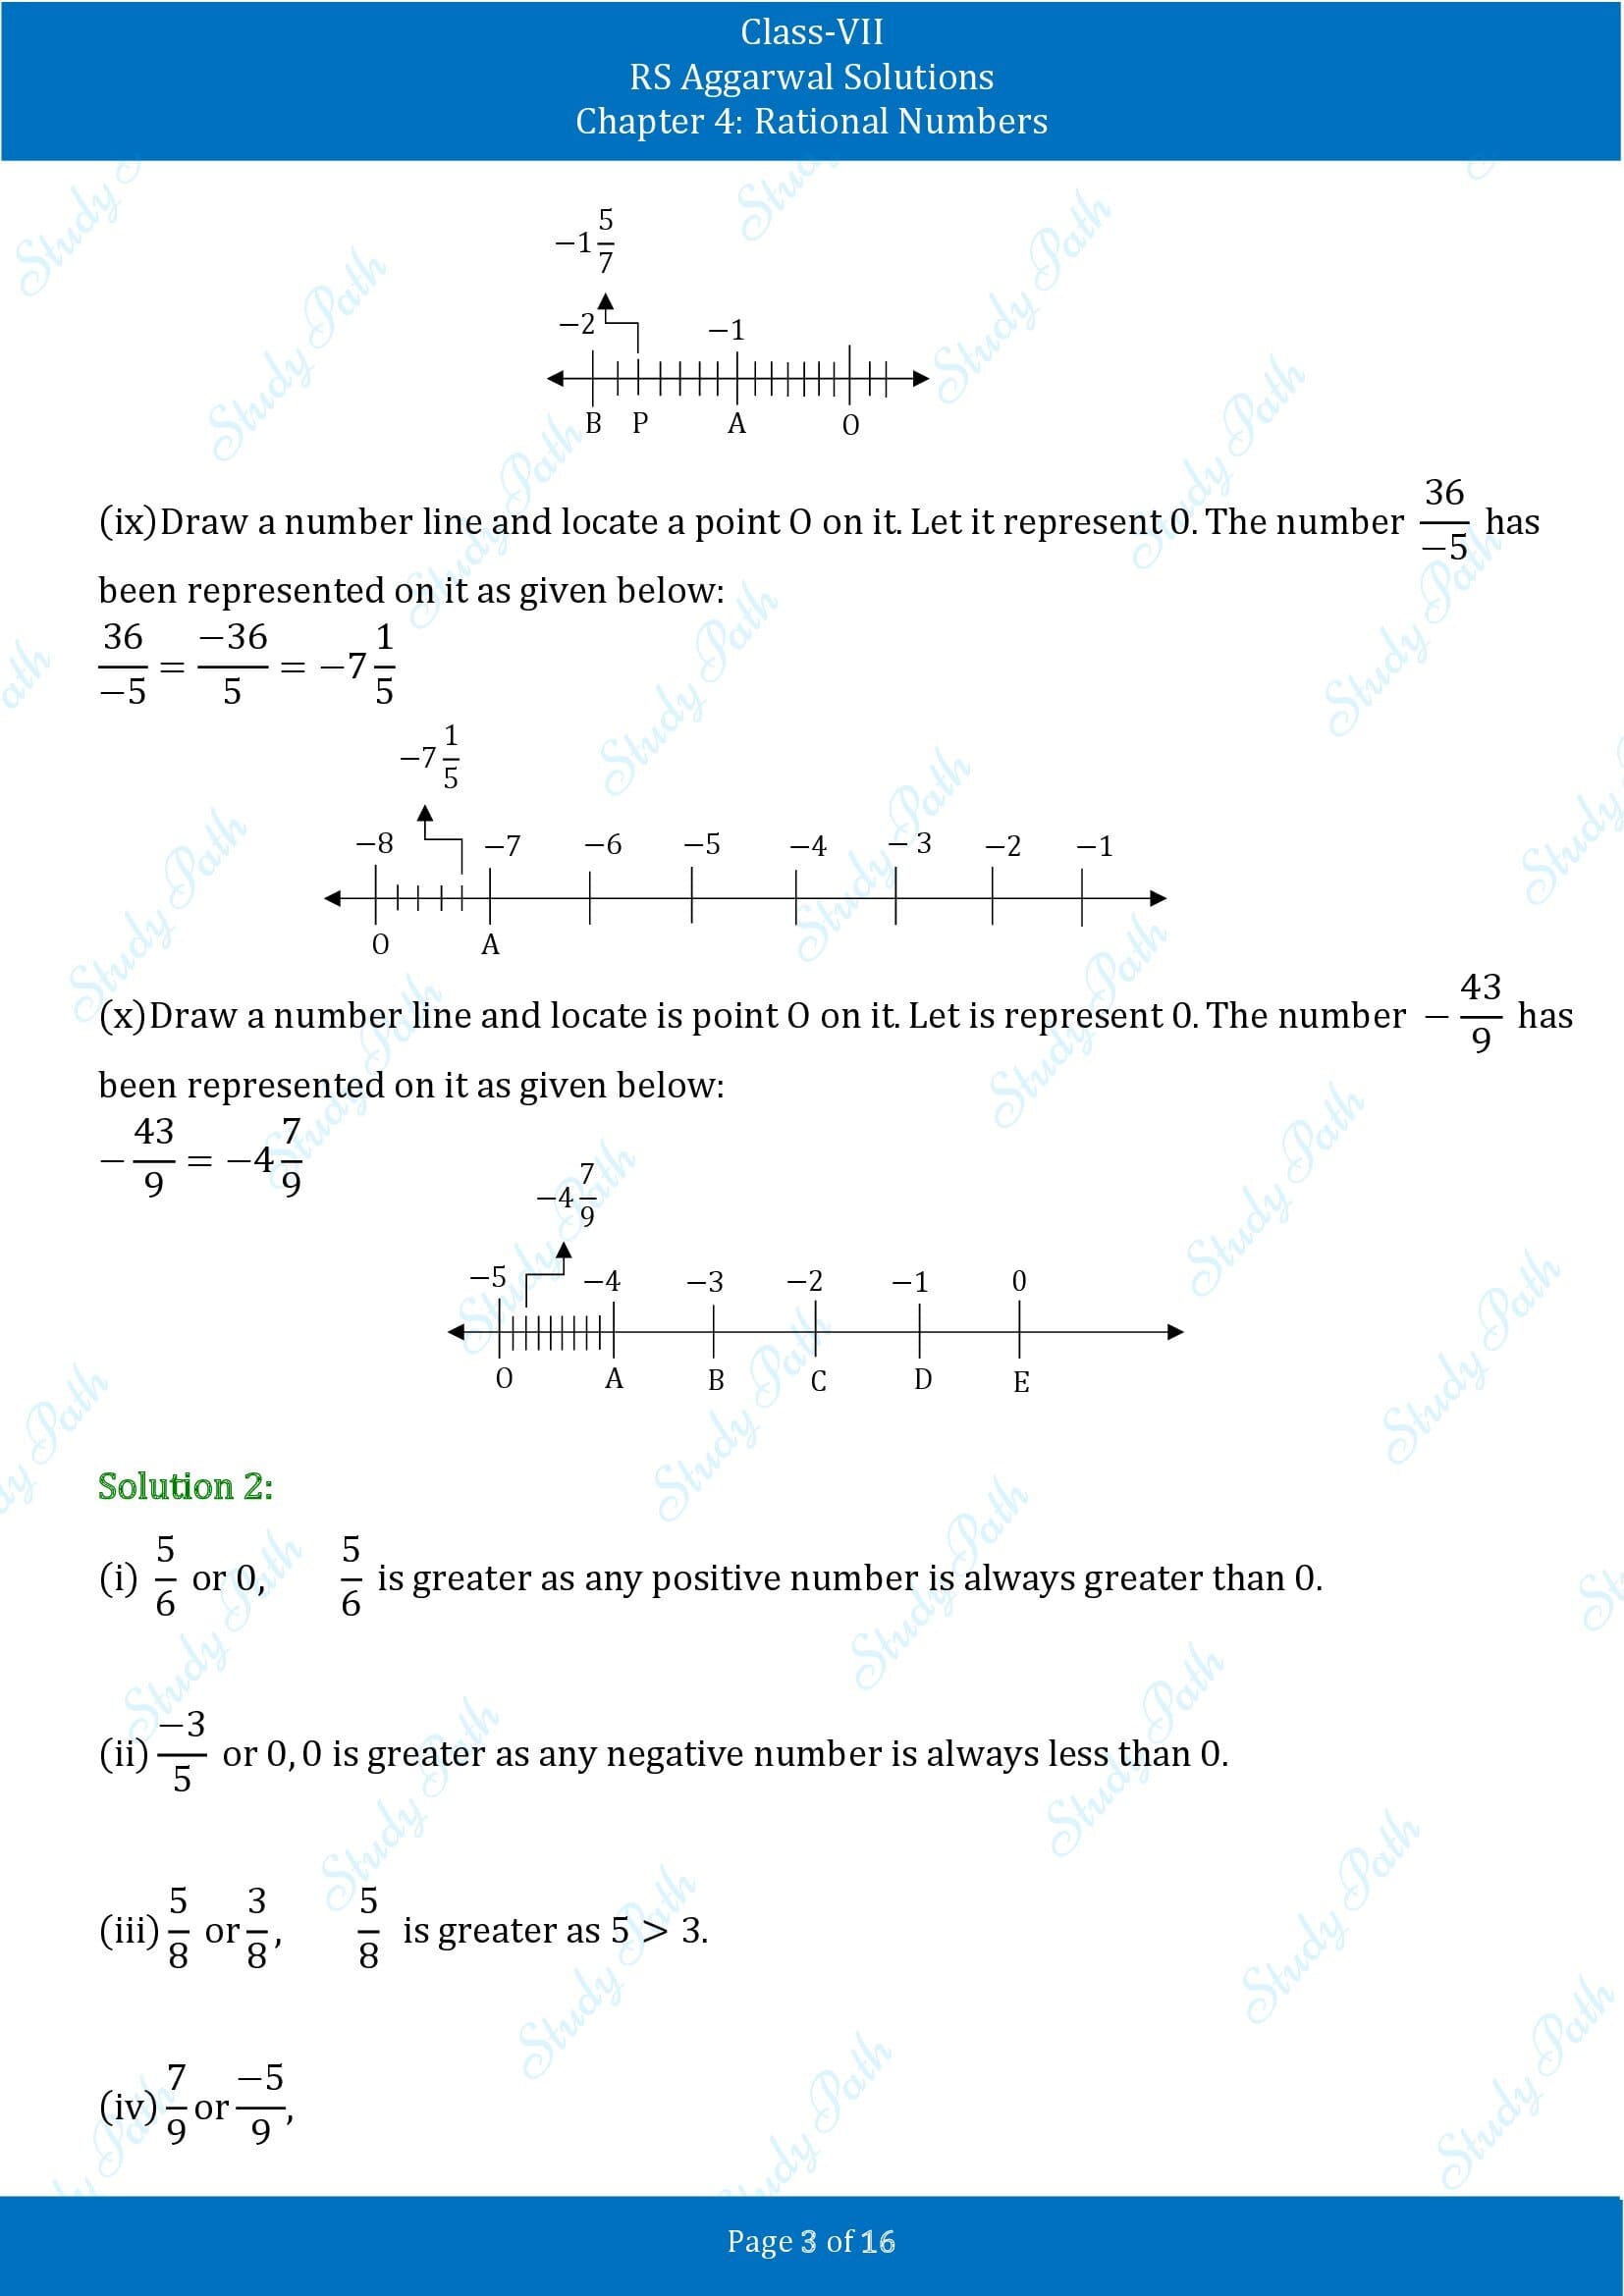 RS Aggarwal Solutions Class 7 Chapter 4 Rational Numbers Exercise 4B 00003